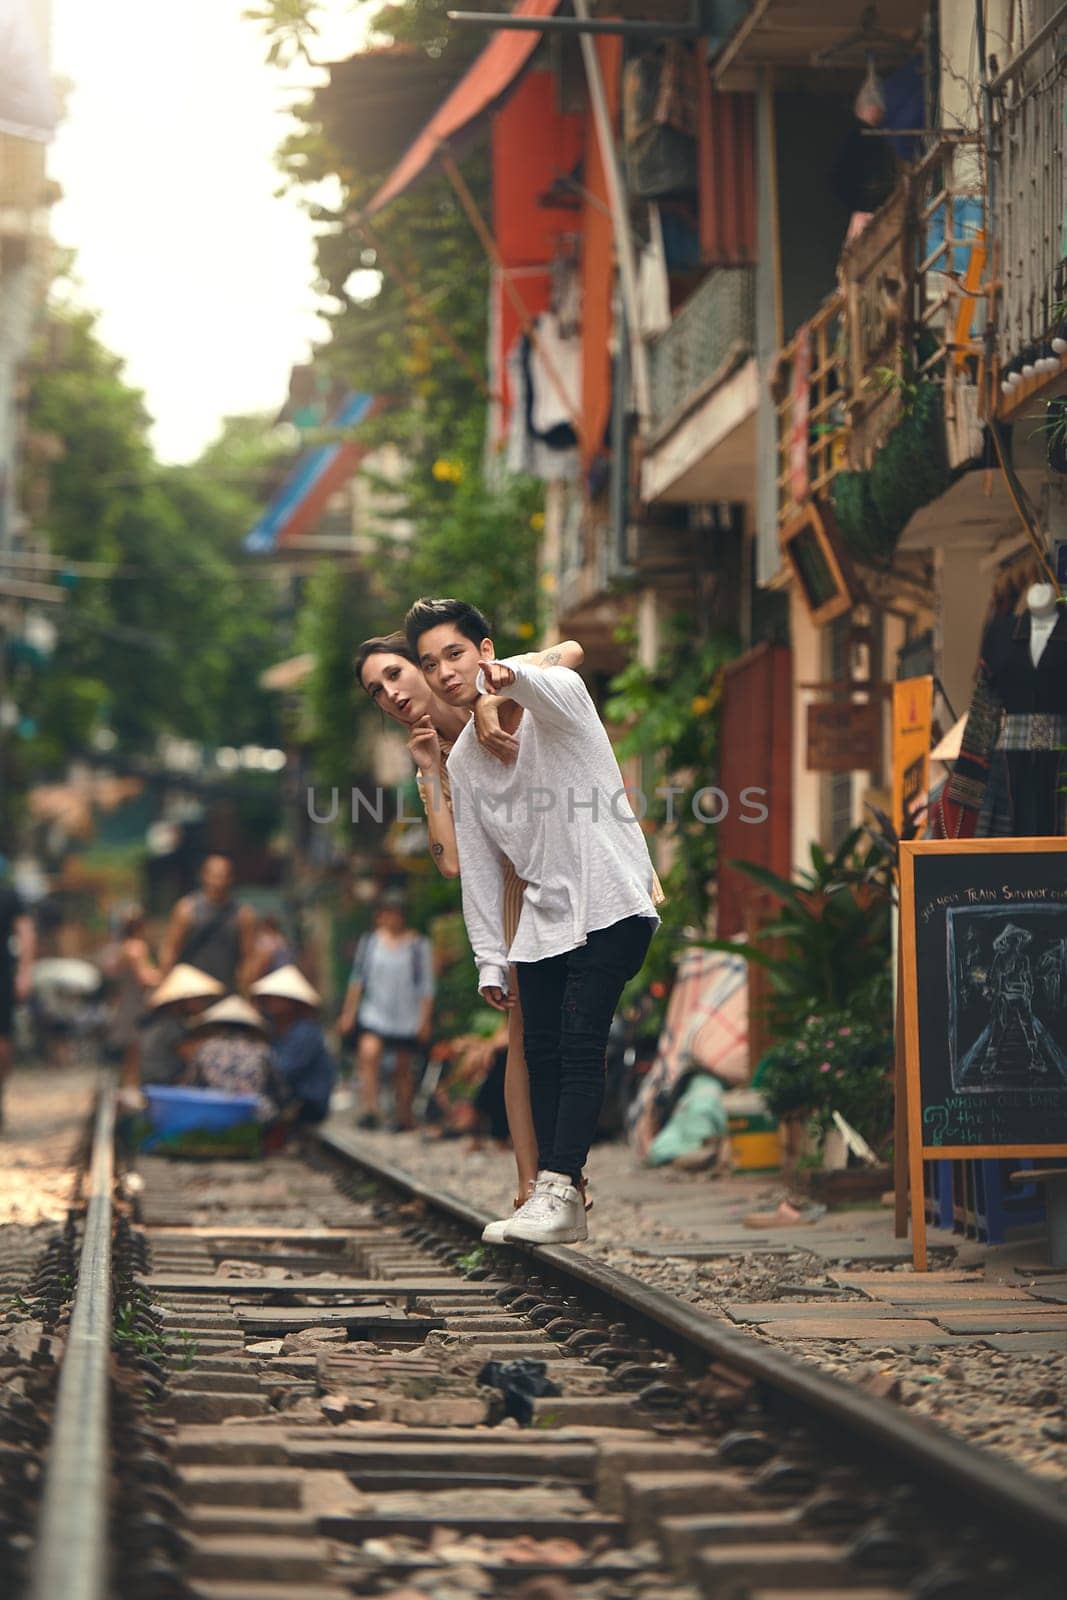 One day our train will come in. a young couple waiting for their train to arrive while exploring Vietnam. by YuriArcurs